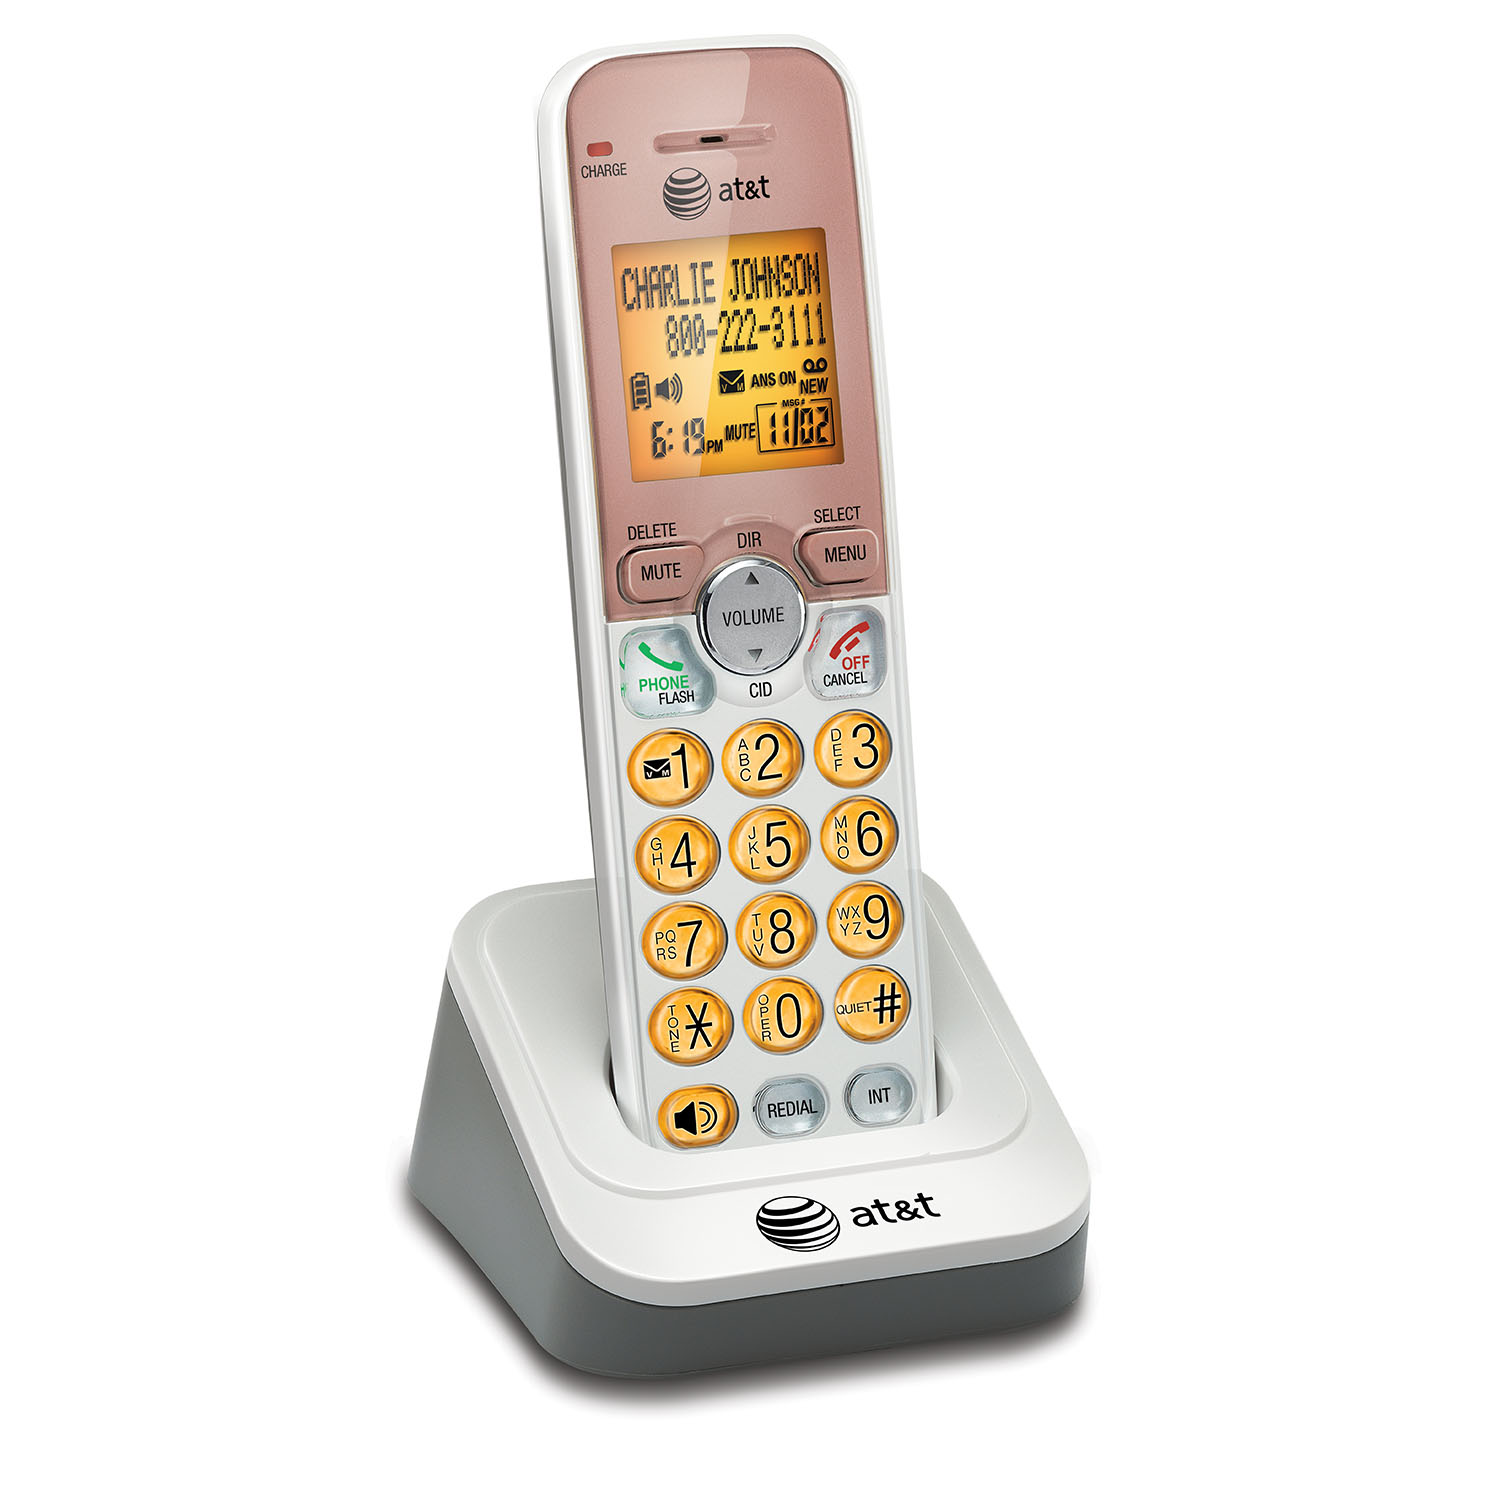 3 handset cordless answering system with caller ID/call waiting - view 6